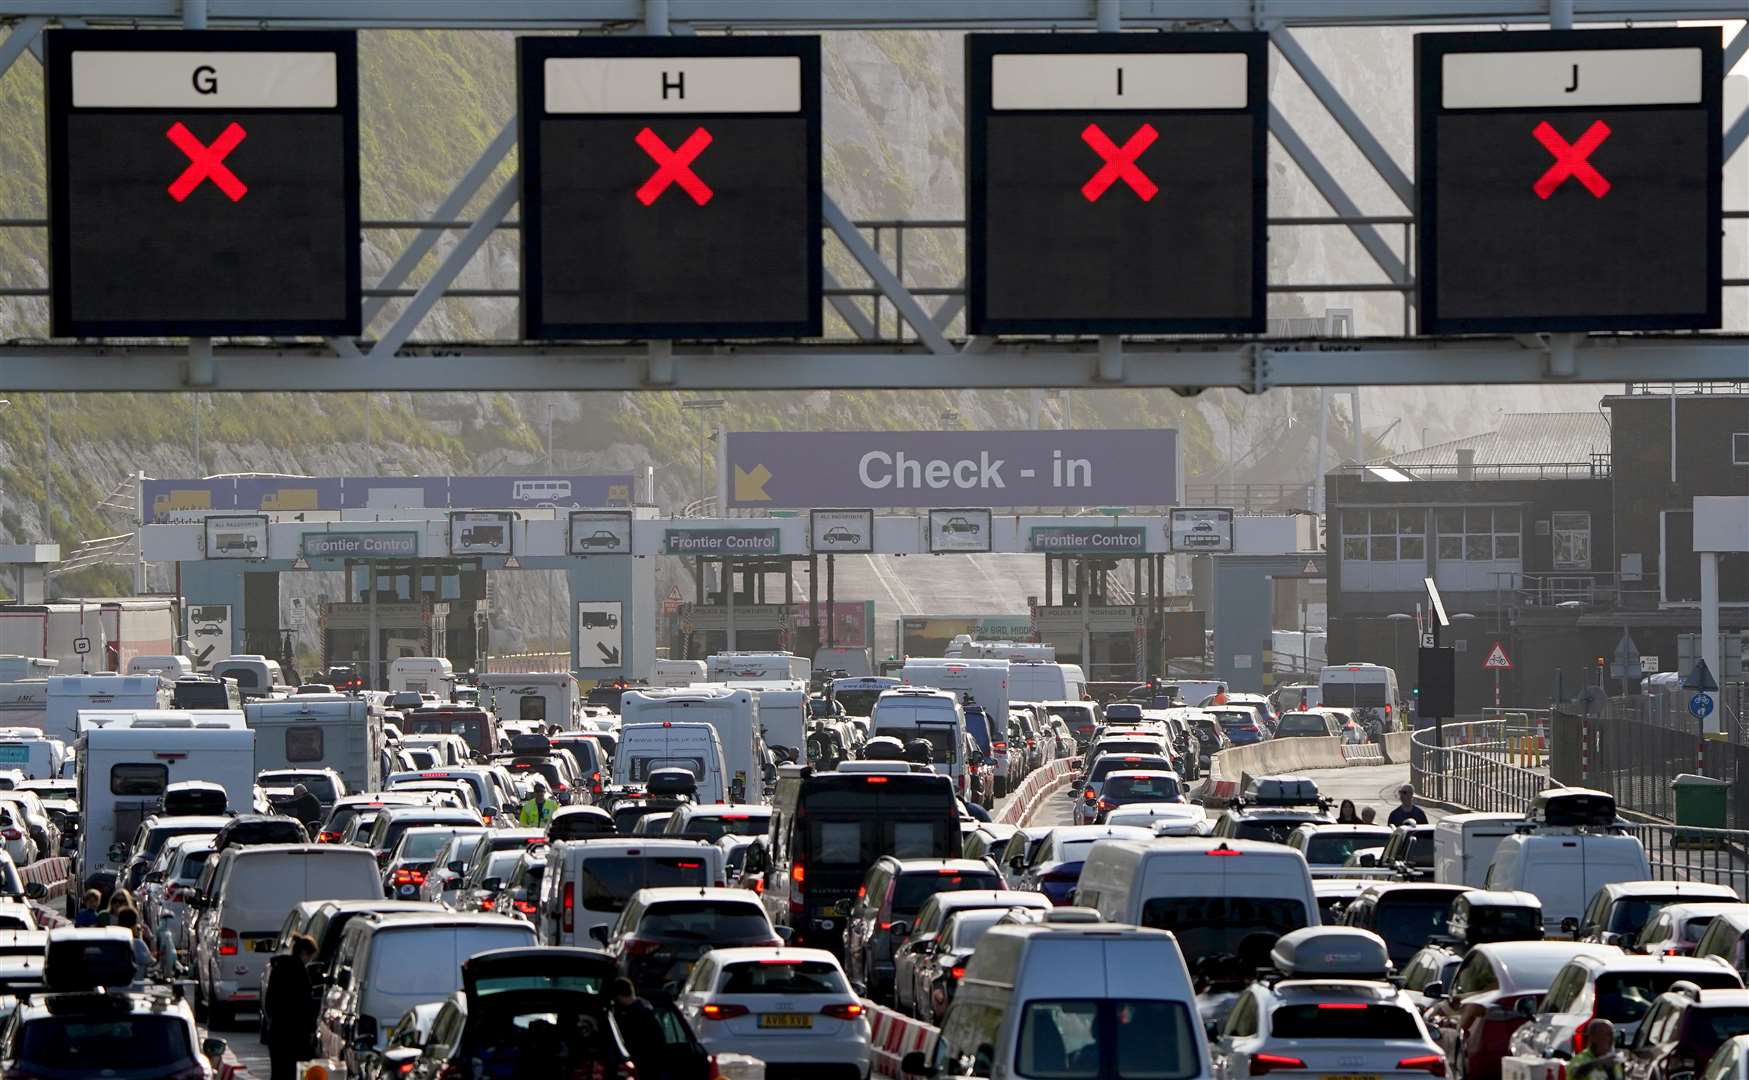 Passengers queue for ferries at the Port of Dover (Gareth Fuller/PA)